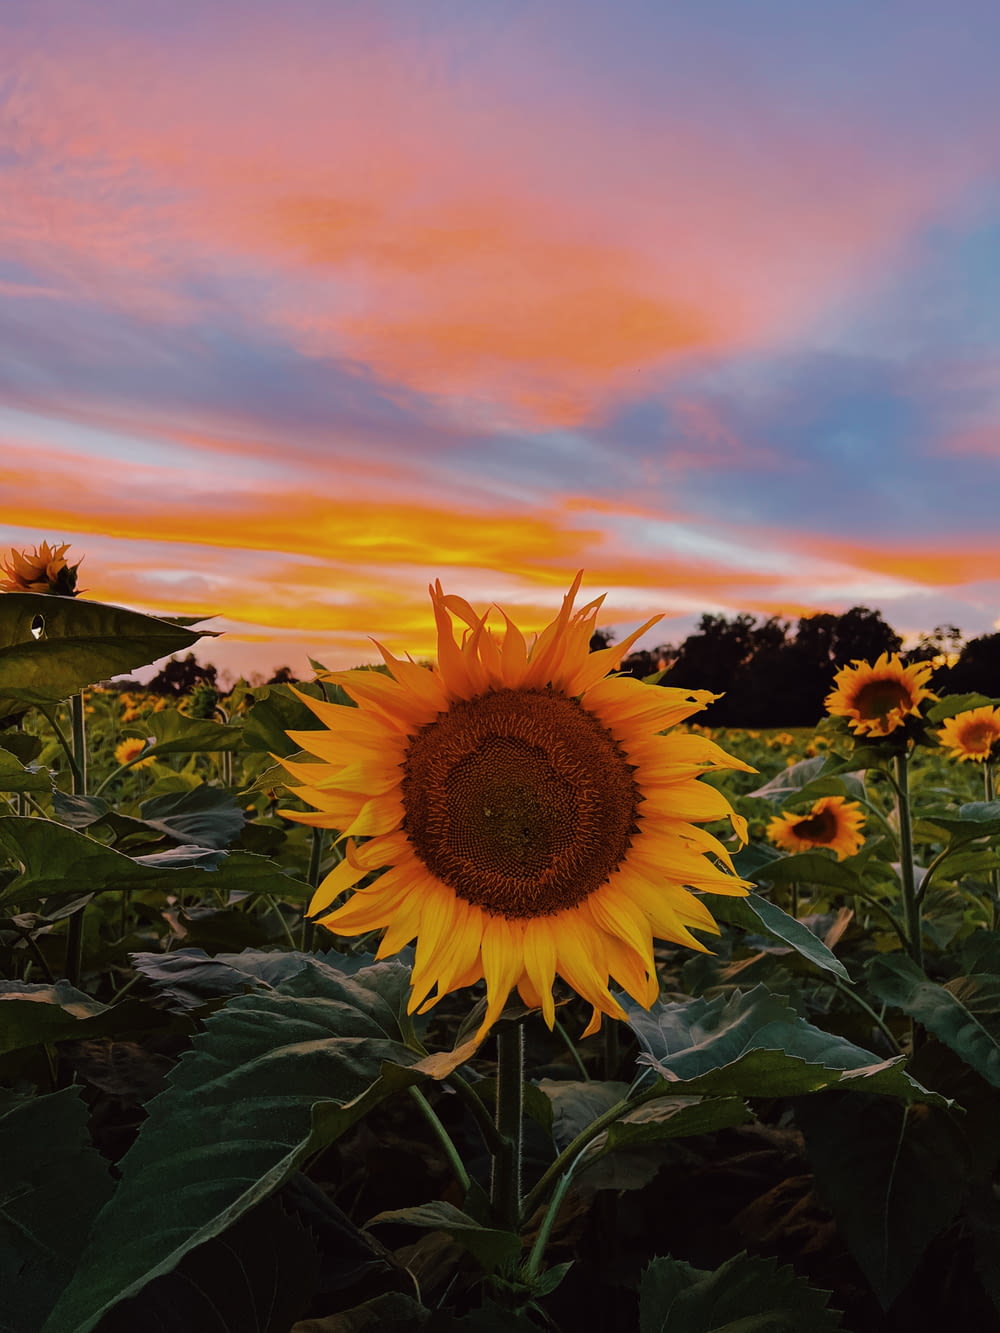 a sunflower in a field with a sunset in the background